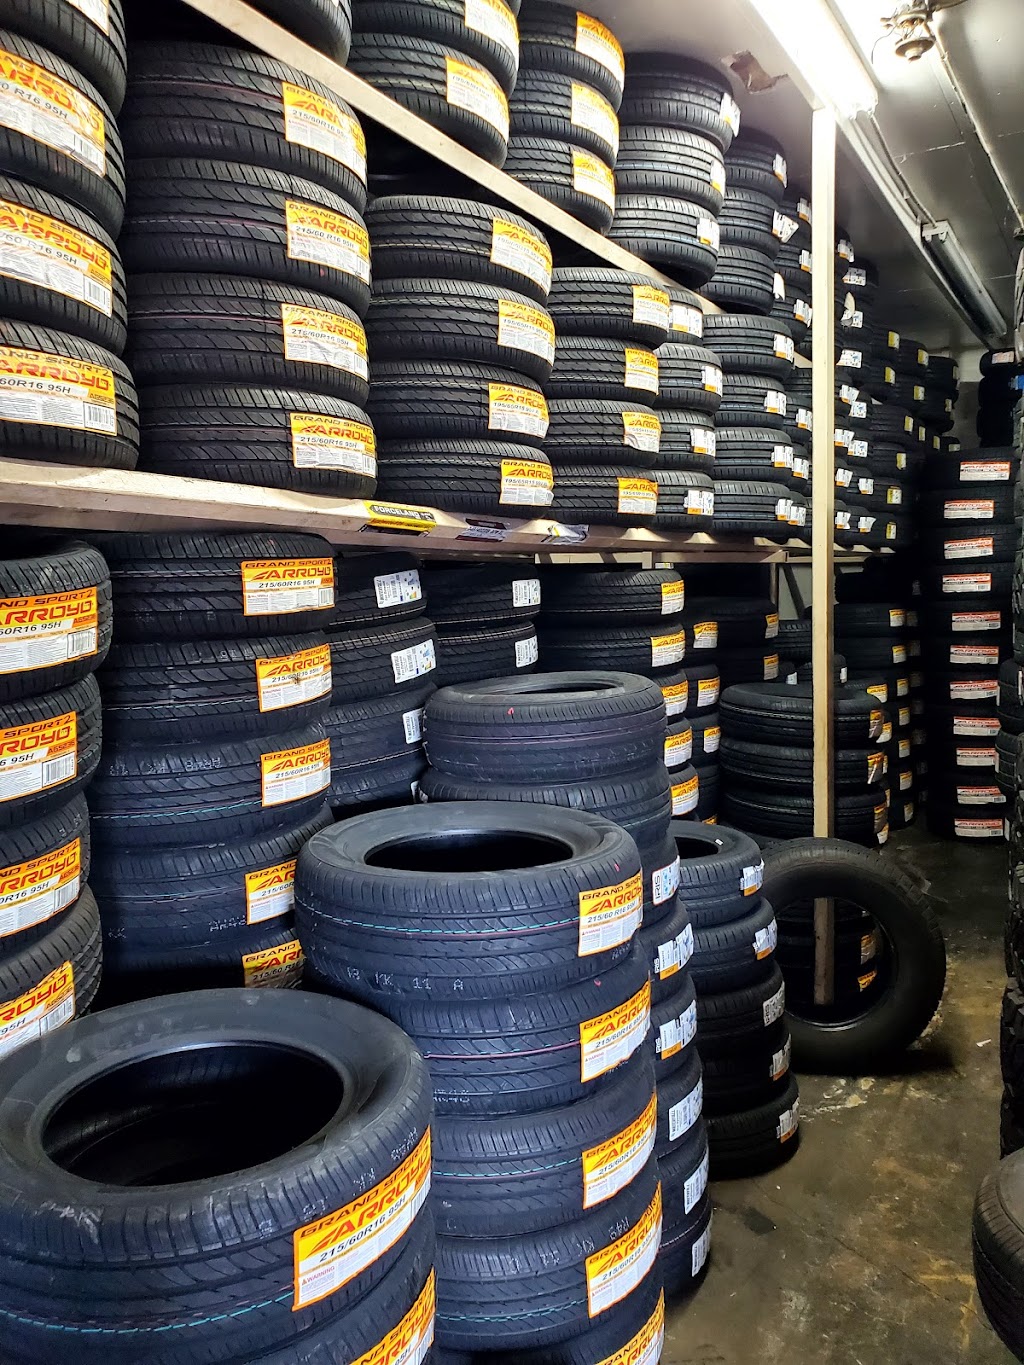 Rolling Tires & Wheels | 25904 S Western Ave, Harbor City, CA 90710, USA | Phone: (310) 326-8444